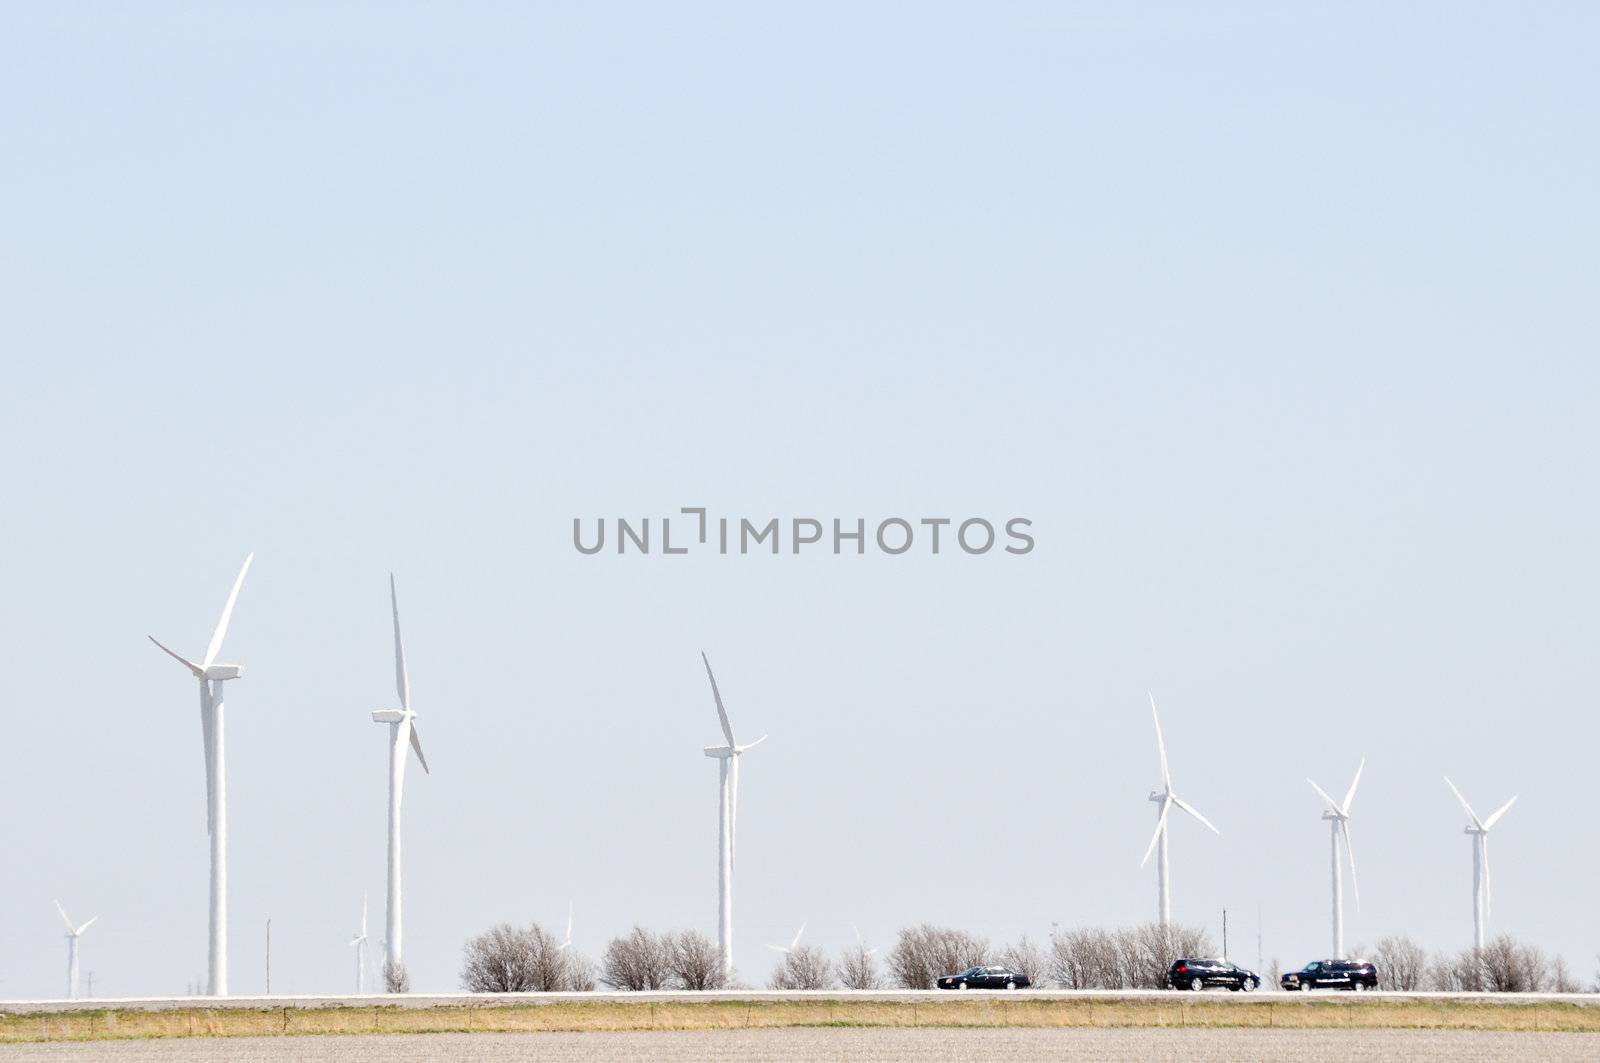 Turbines Spin Over The Road by RefocusPhoto